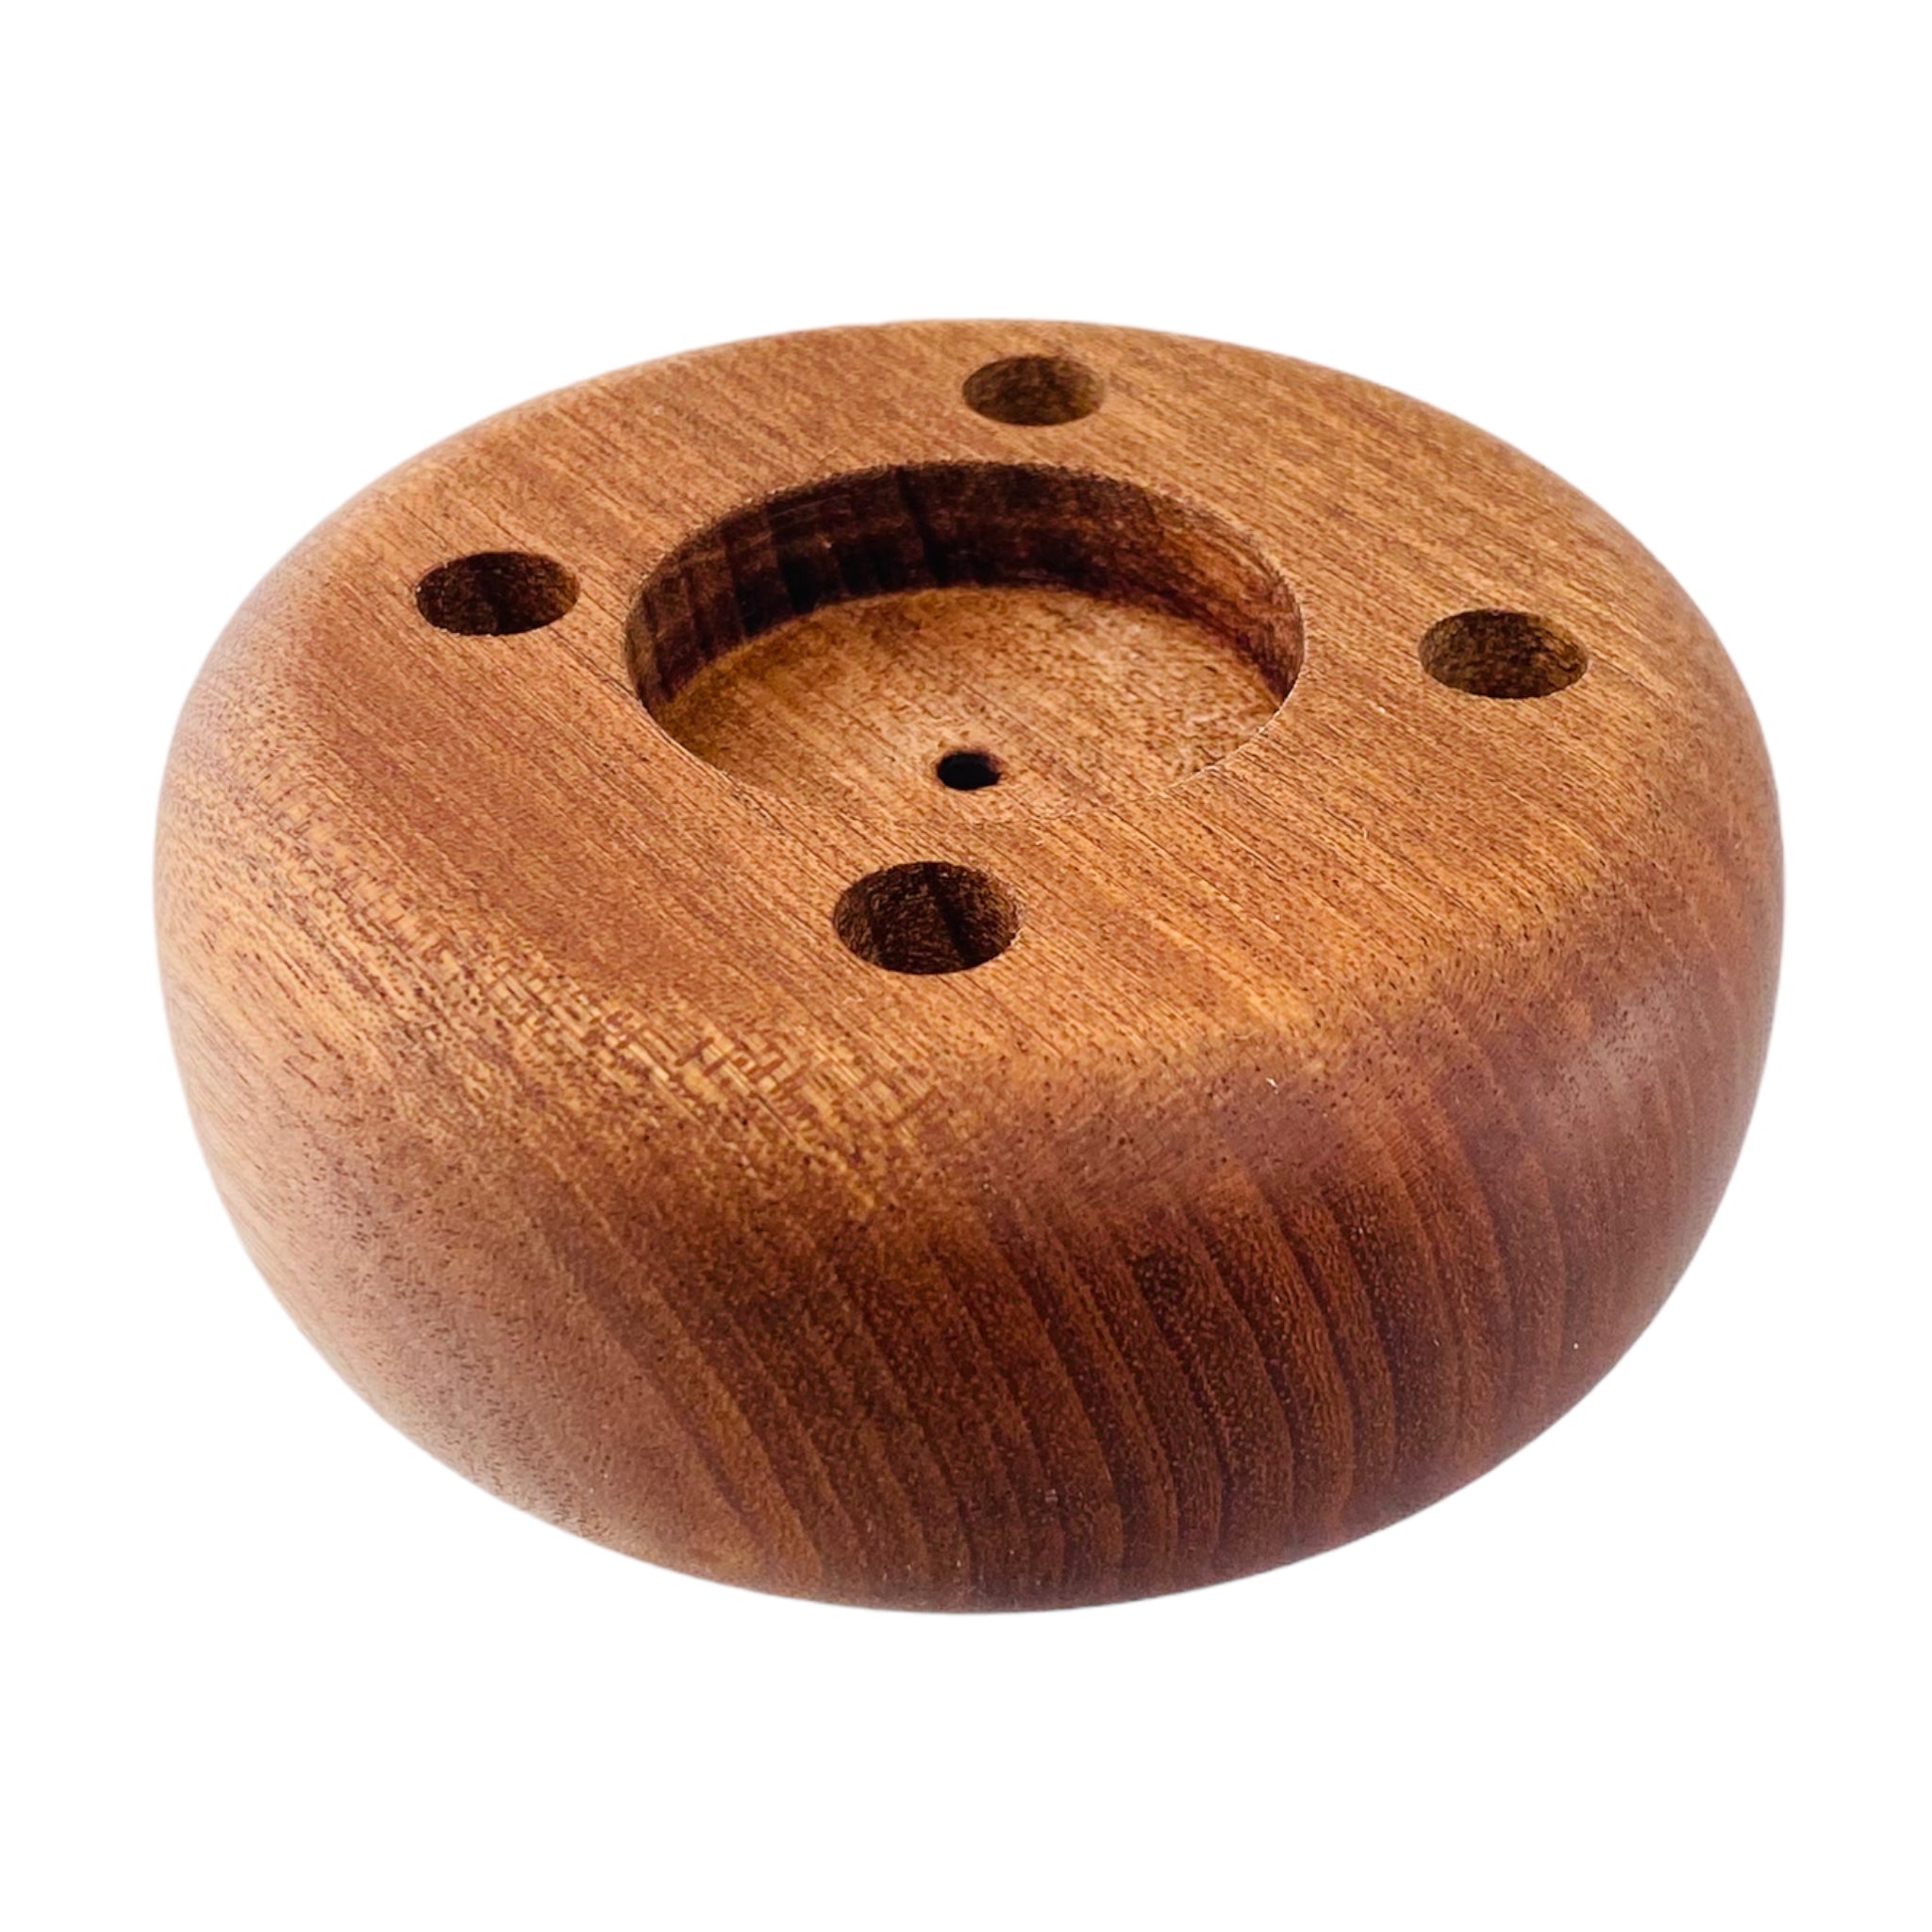 Round 4 Hole Wood Display Stand Holder For 10mm Bong Bowl Pieces Or Quartz Bangers - Mahogany Puck